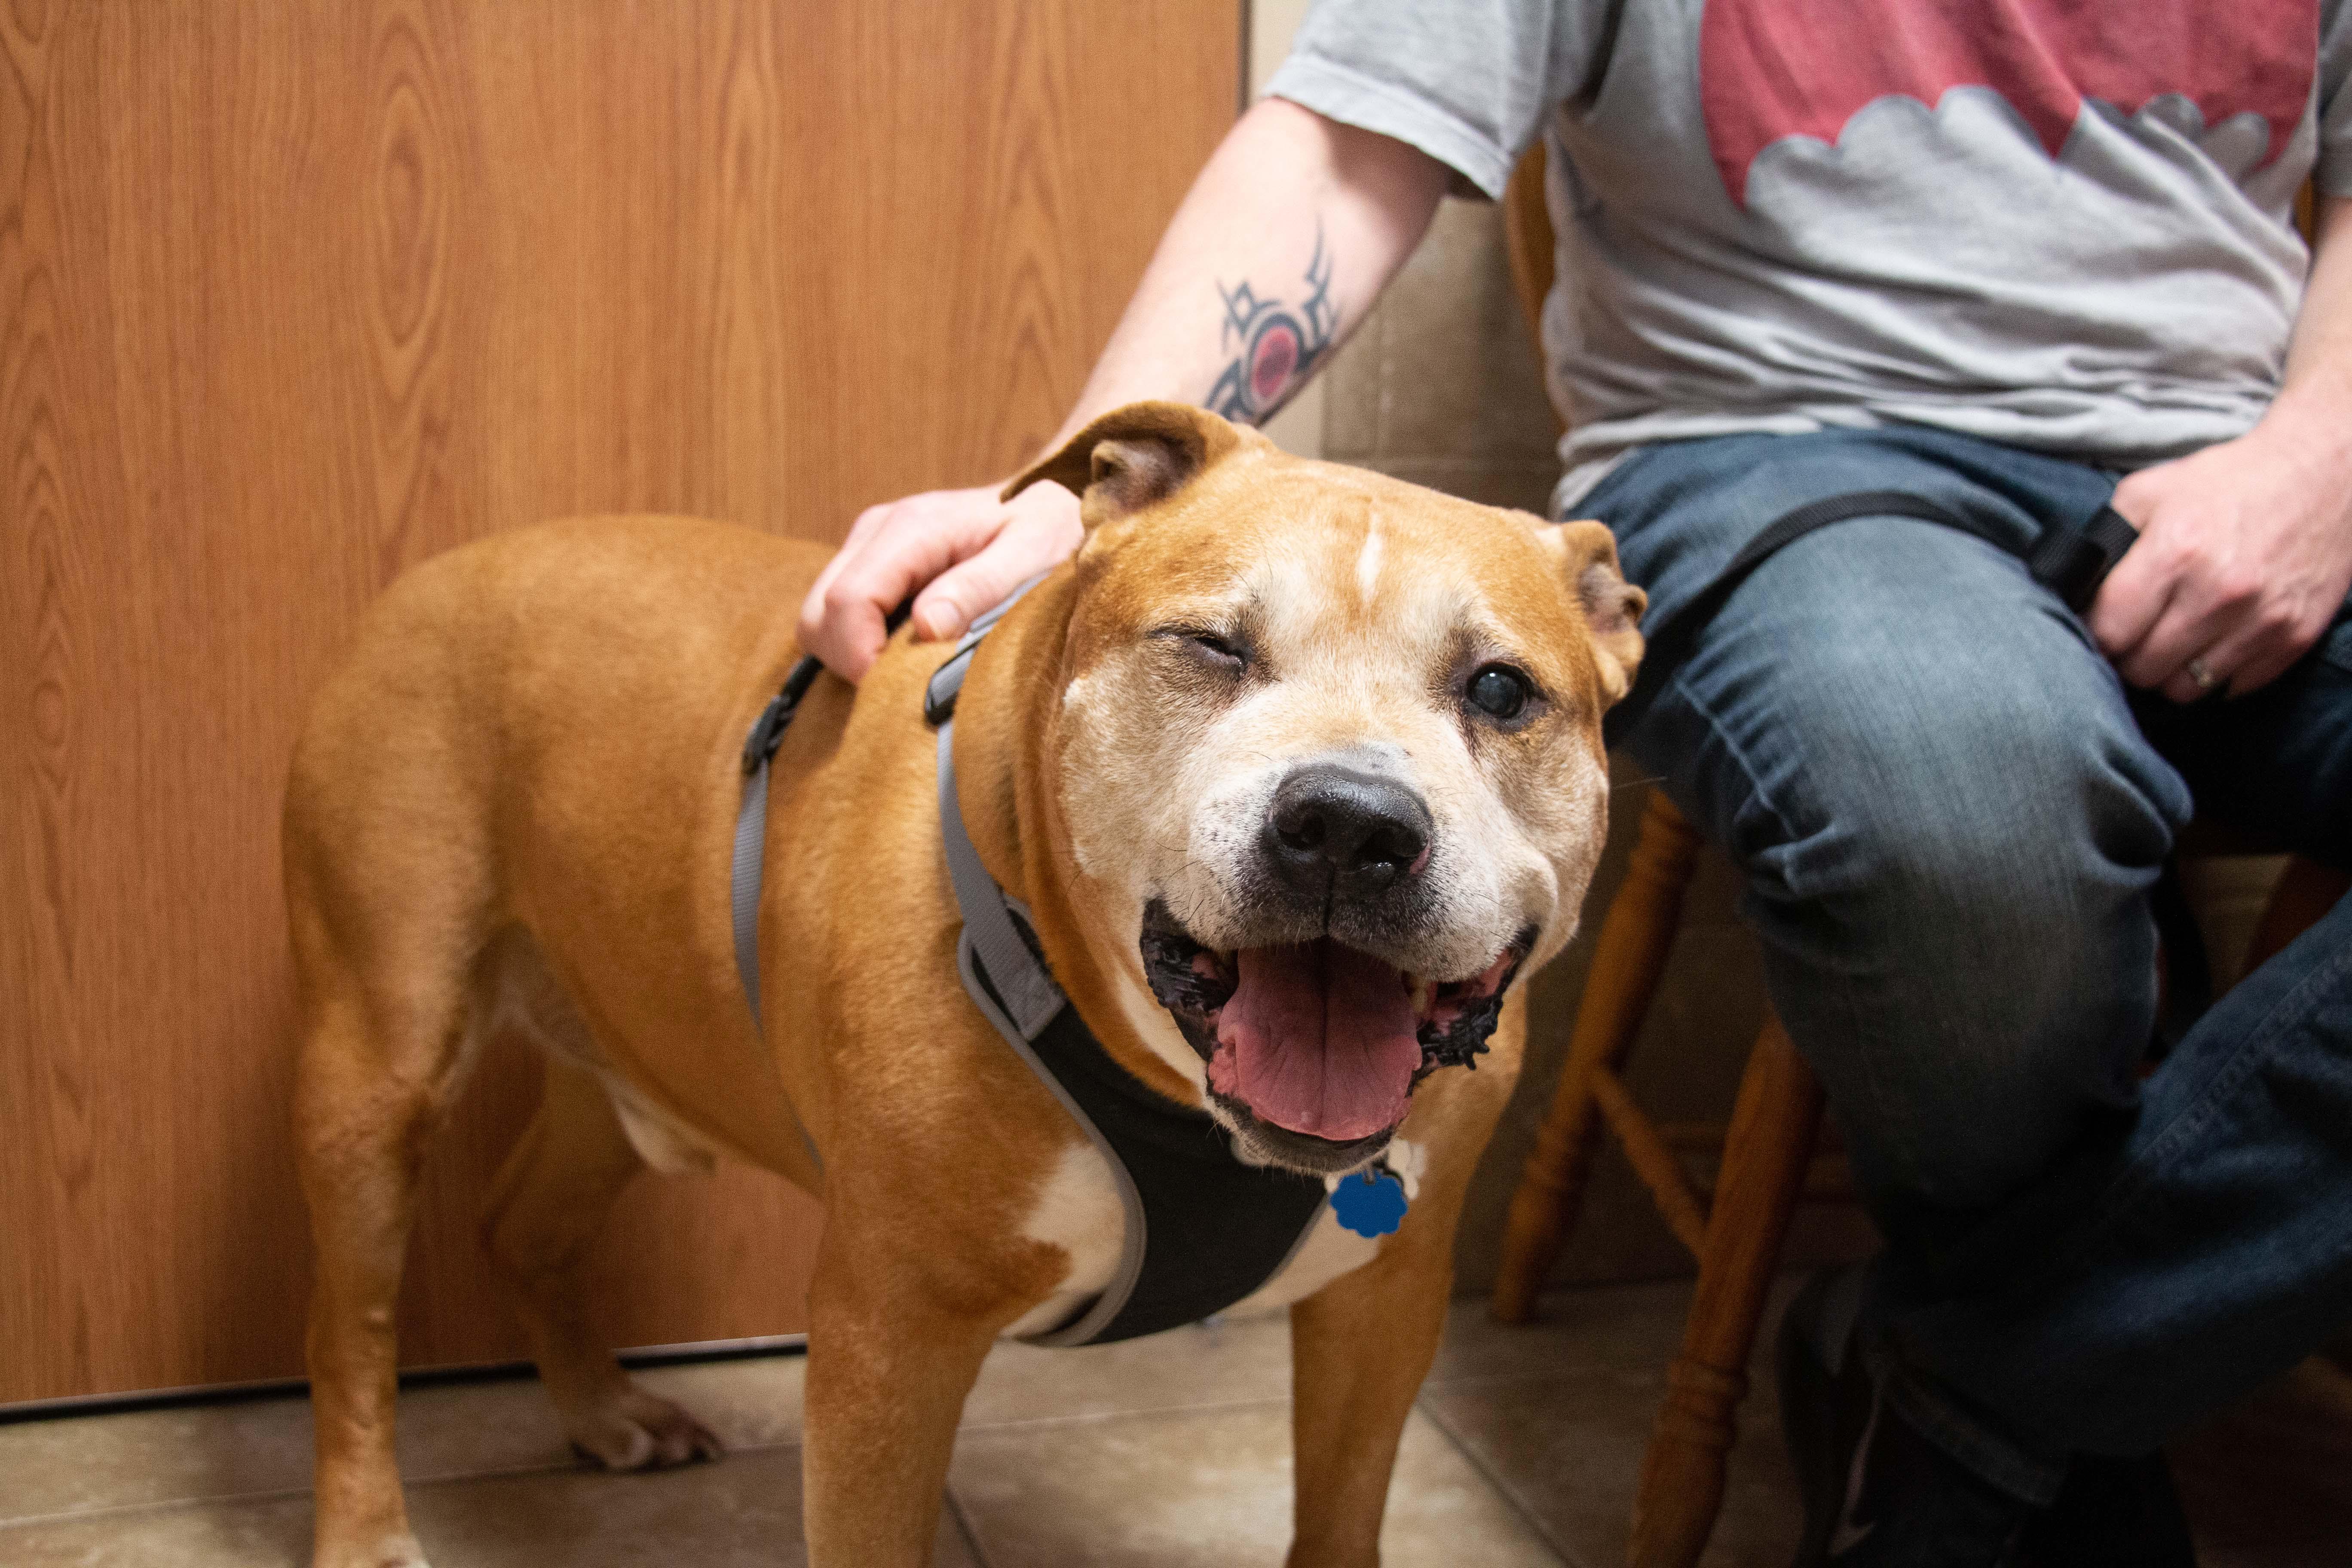 This adorable pup is all smiles for his visit at Belton Animal Clinic!